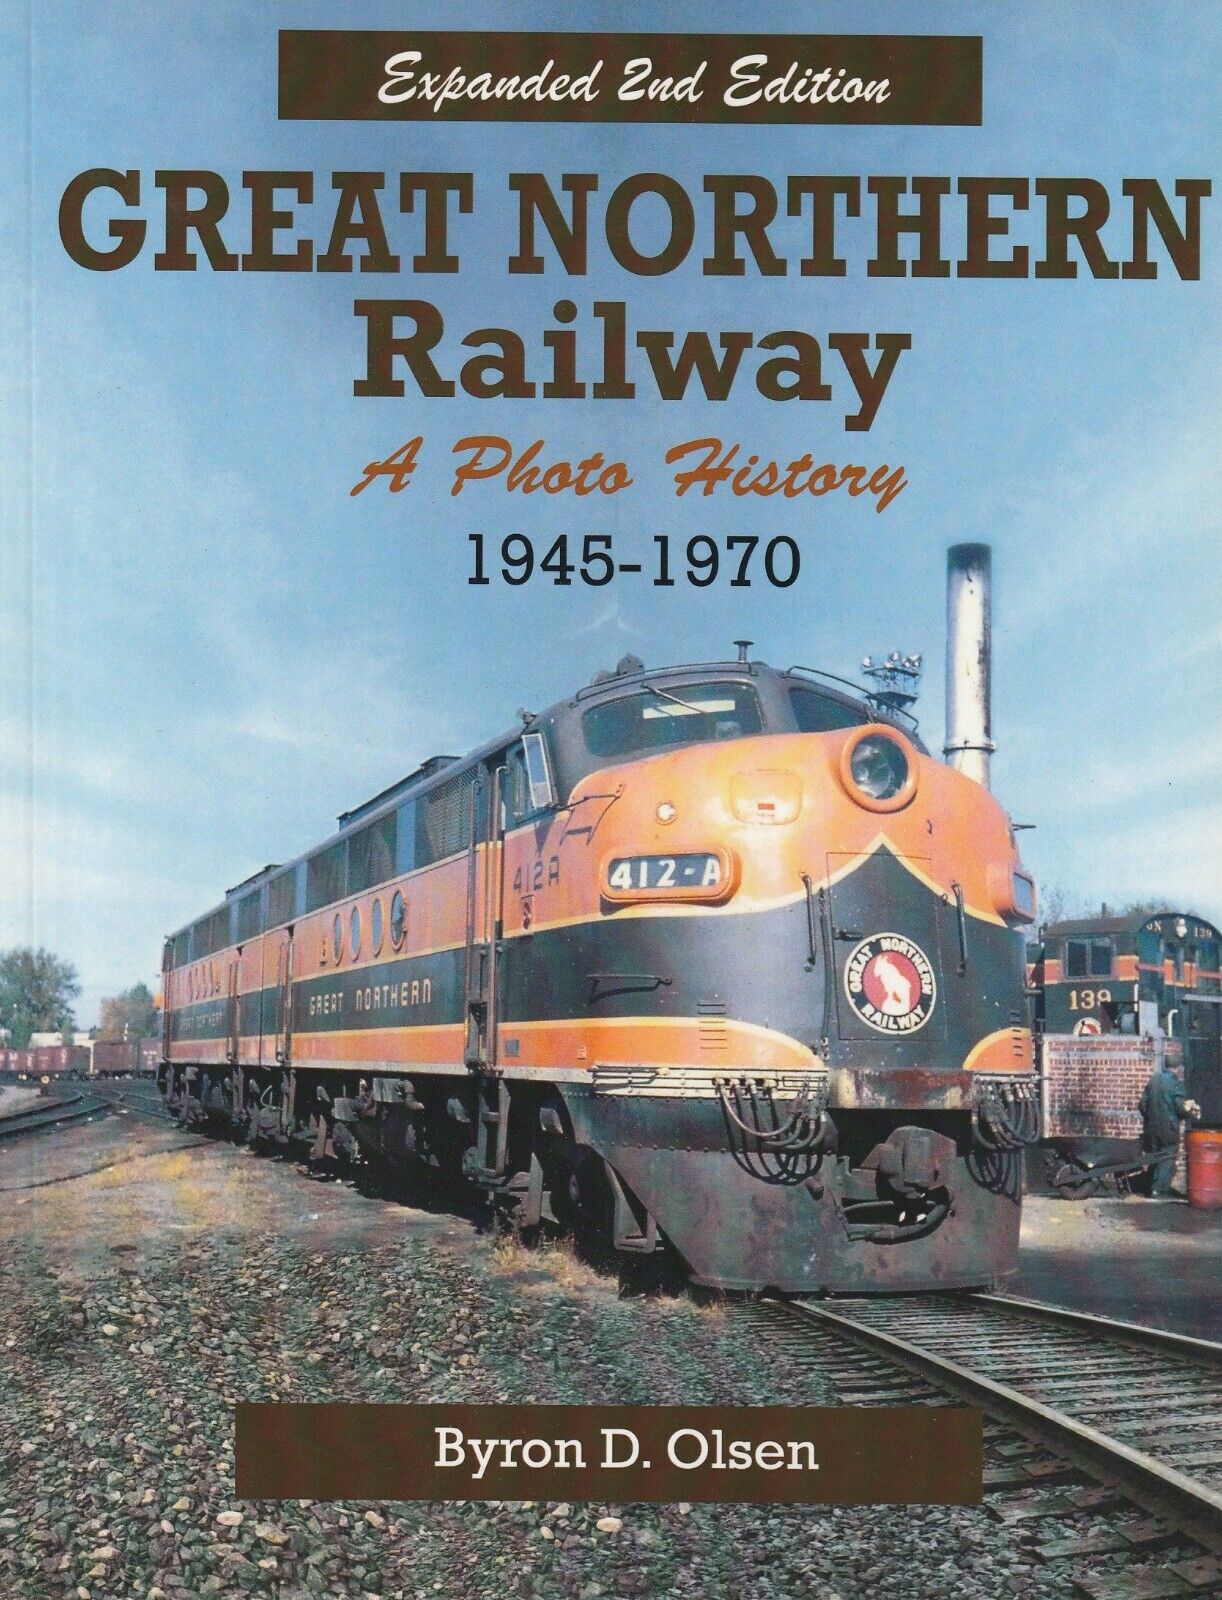 GREAT NORTHERN Railway, A Photo History, 1945-1970 - (BRAND NEW BOOK)